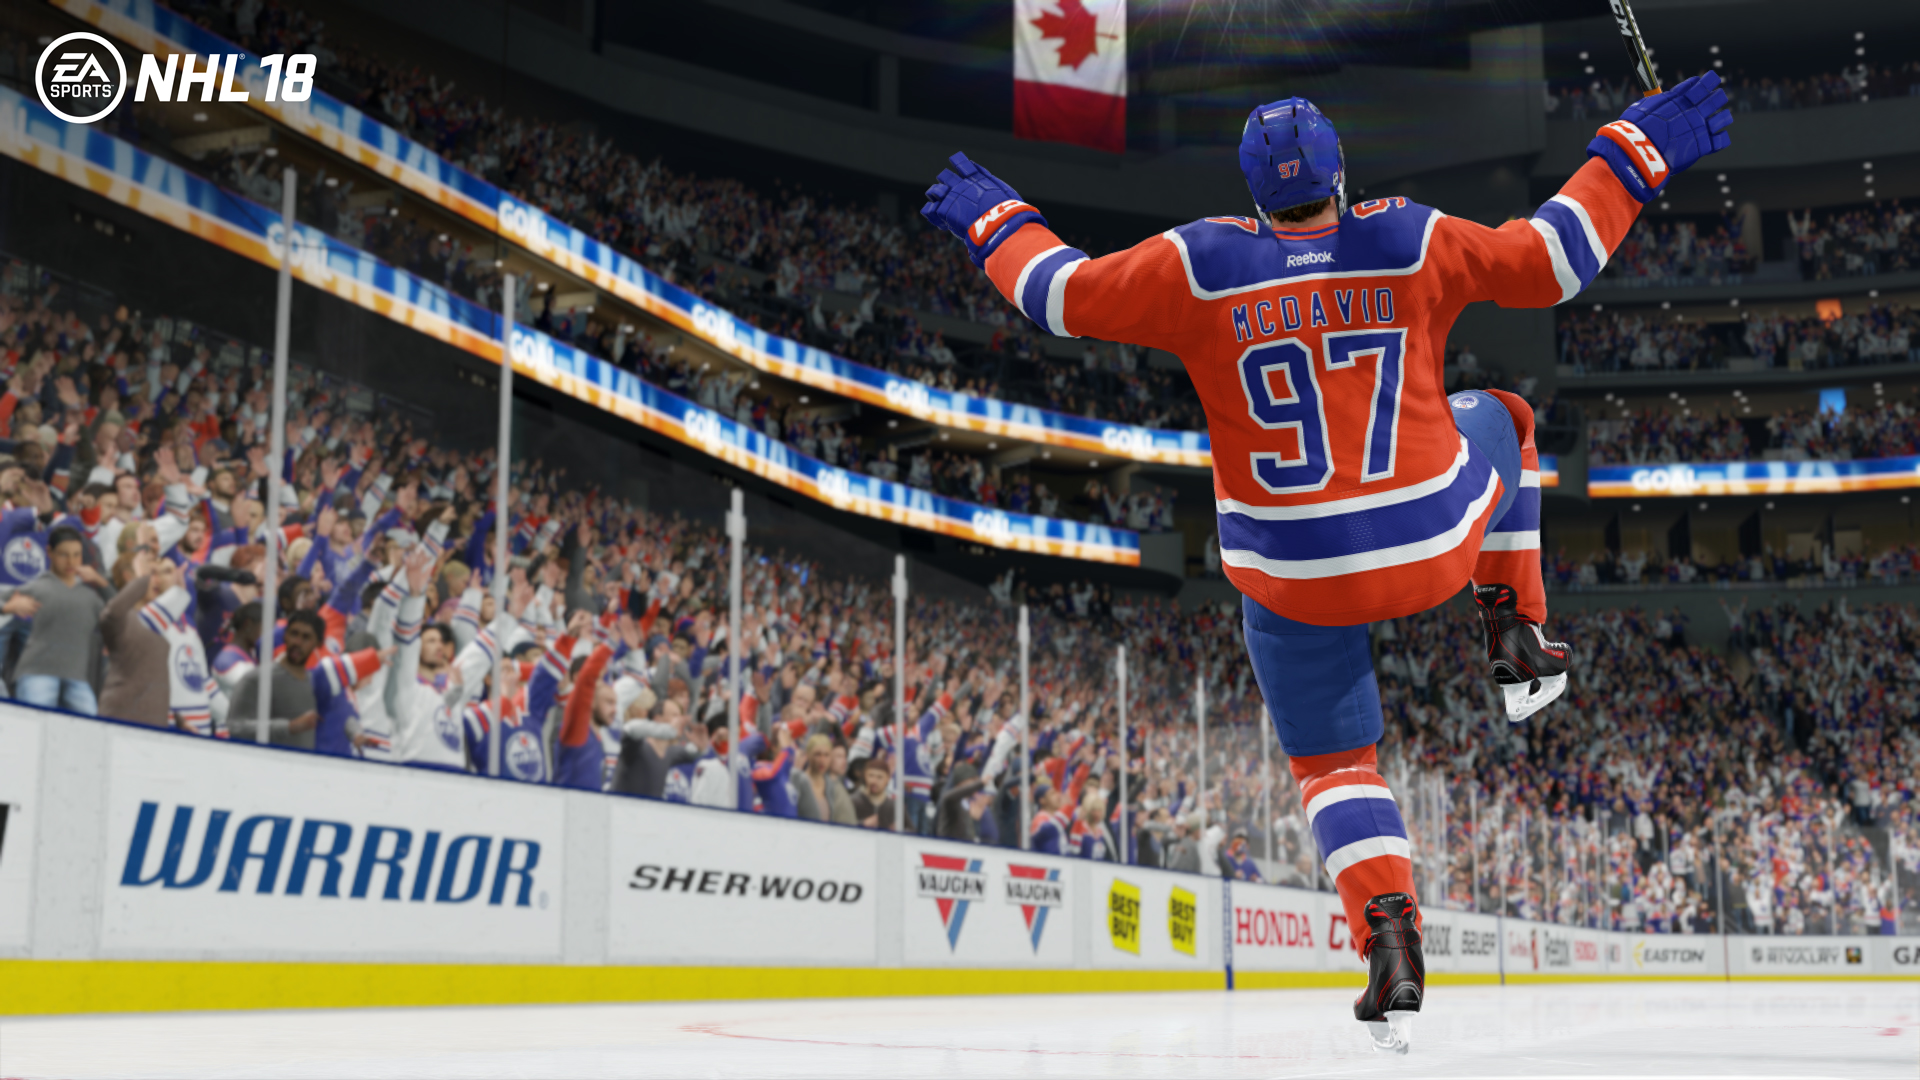 Nhl 18 Cover With Connor Mcdavid - Nhl 2018 Ea Sport - HD Wallpaper 